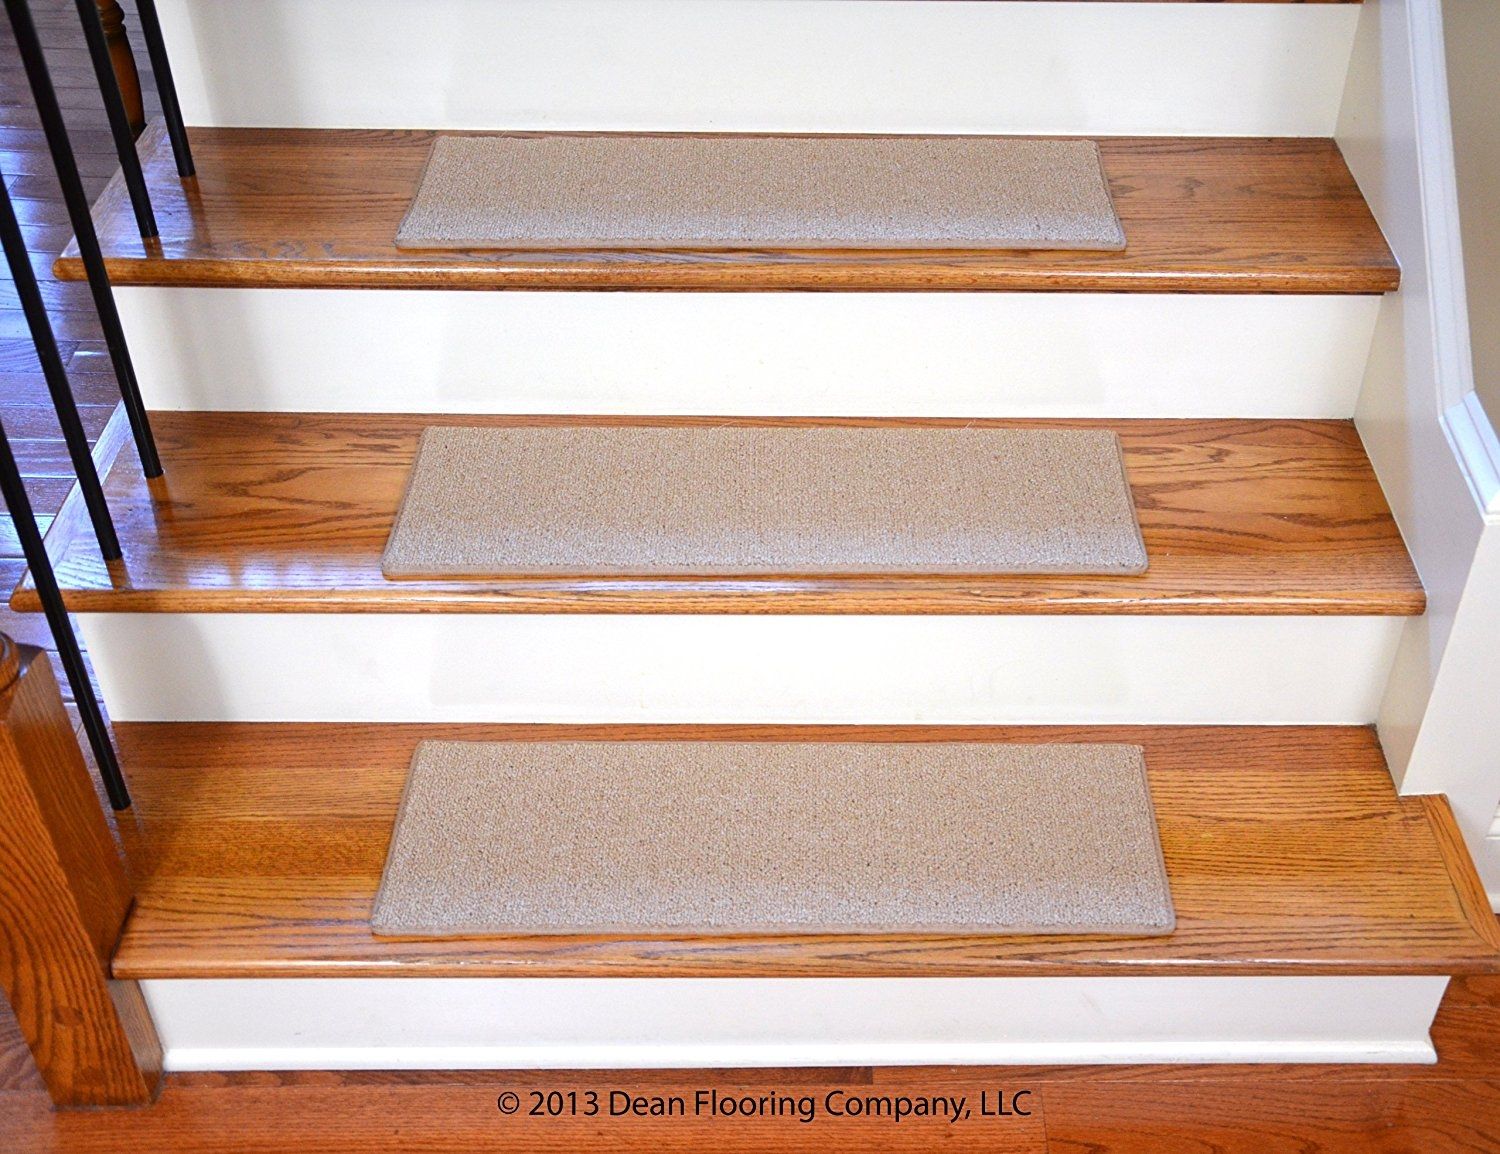 Dean Non Slip Tape Free Pet Friendly Diy Carpet Stair Treadsrugs Intended For Indoor Outdoor Carpet Stair Treads (View 17 of 20)